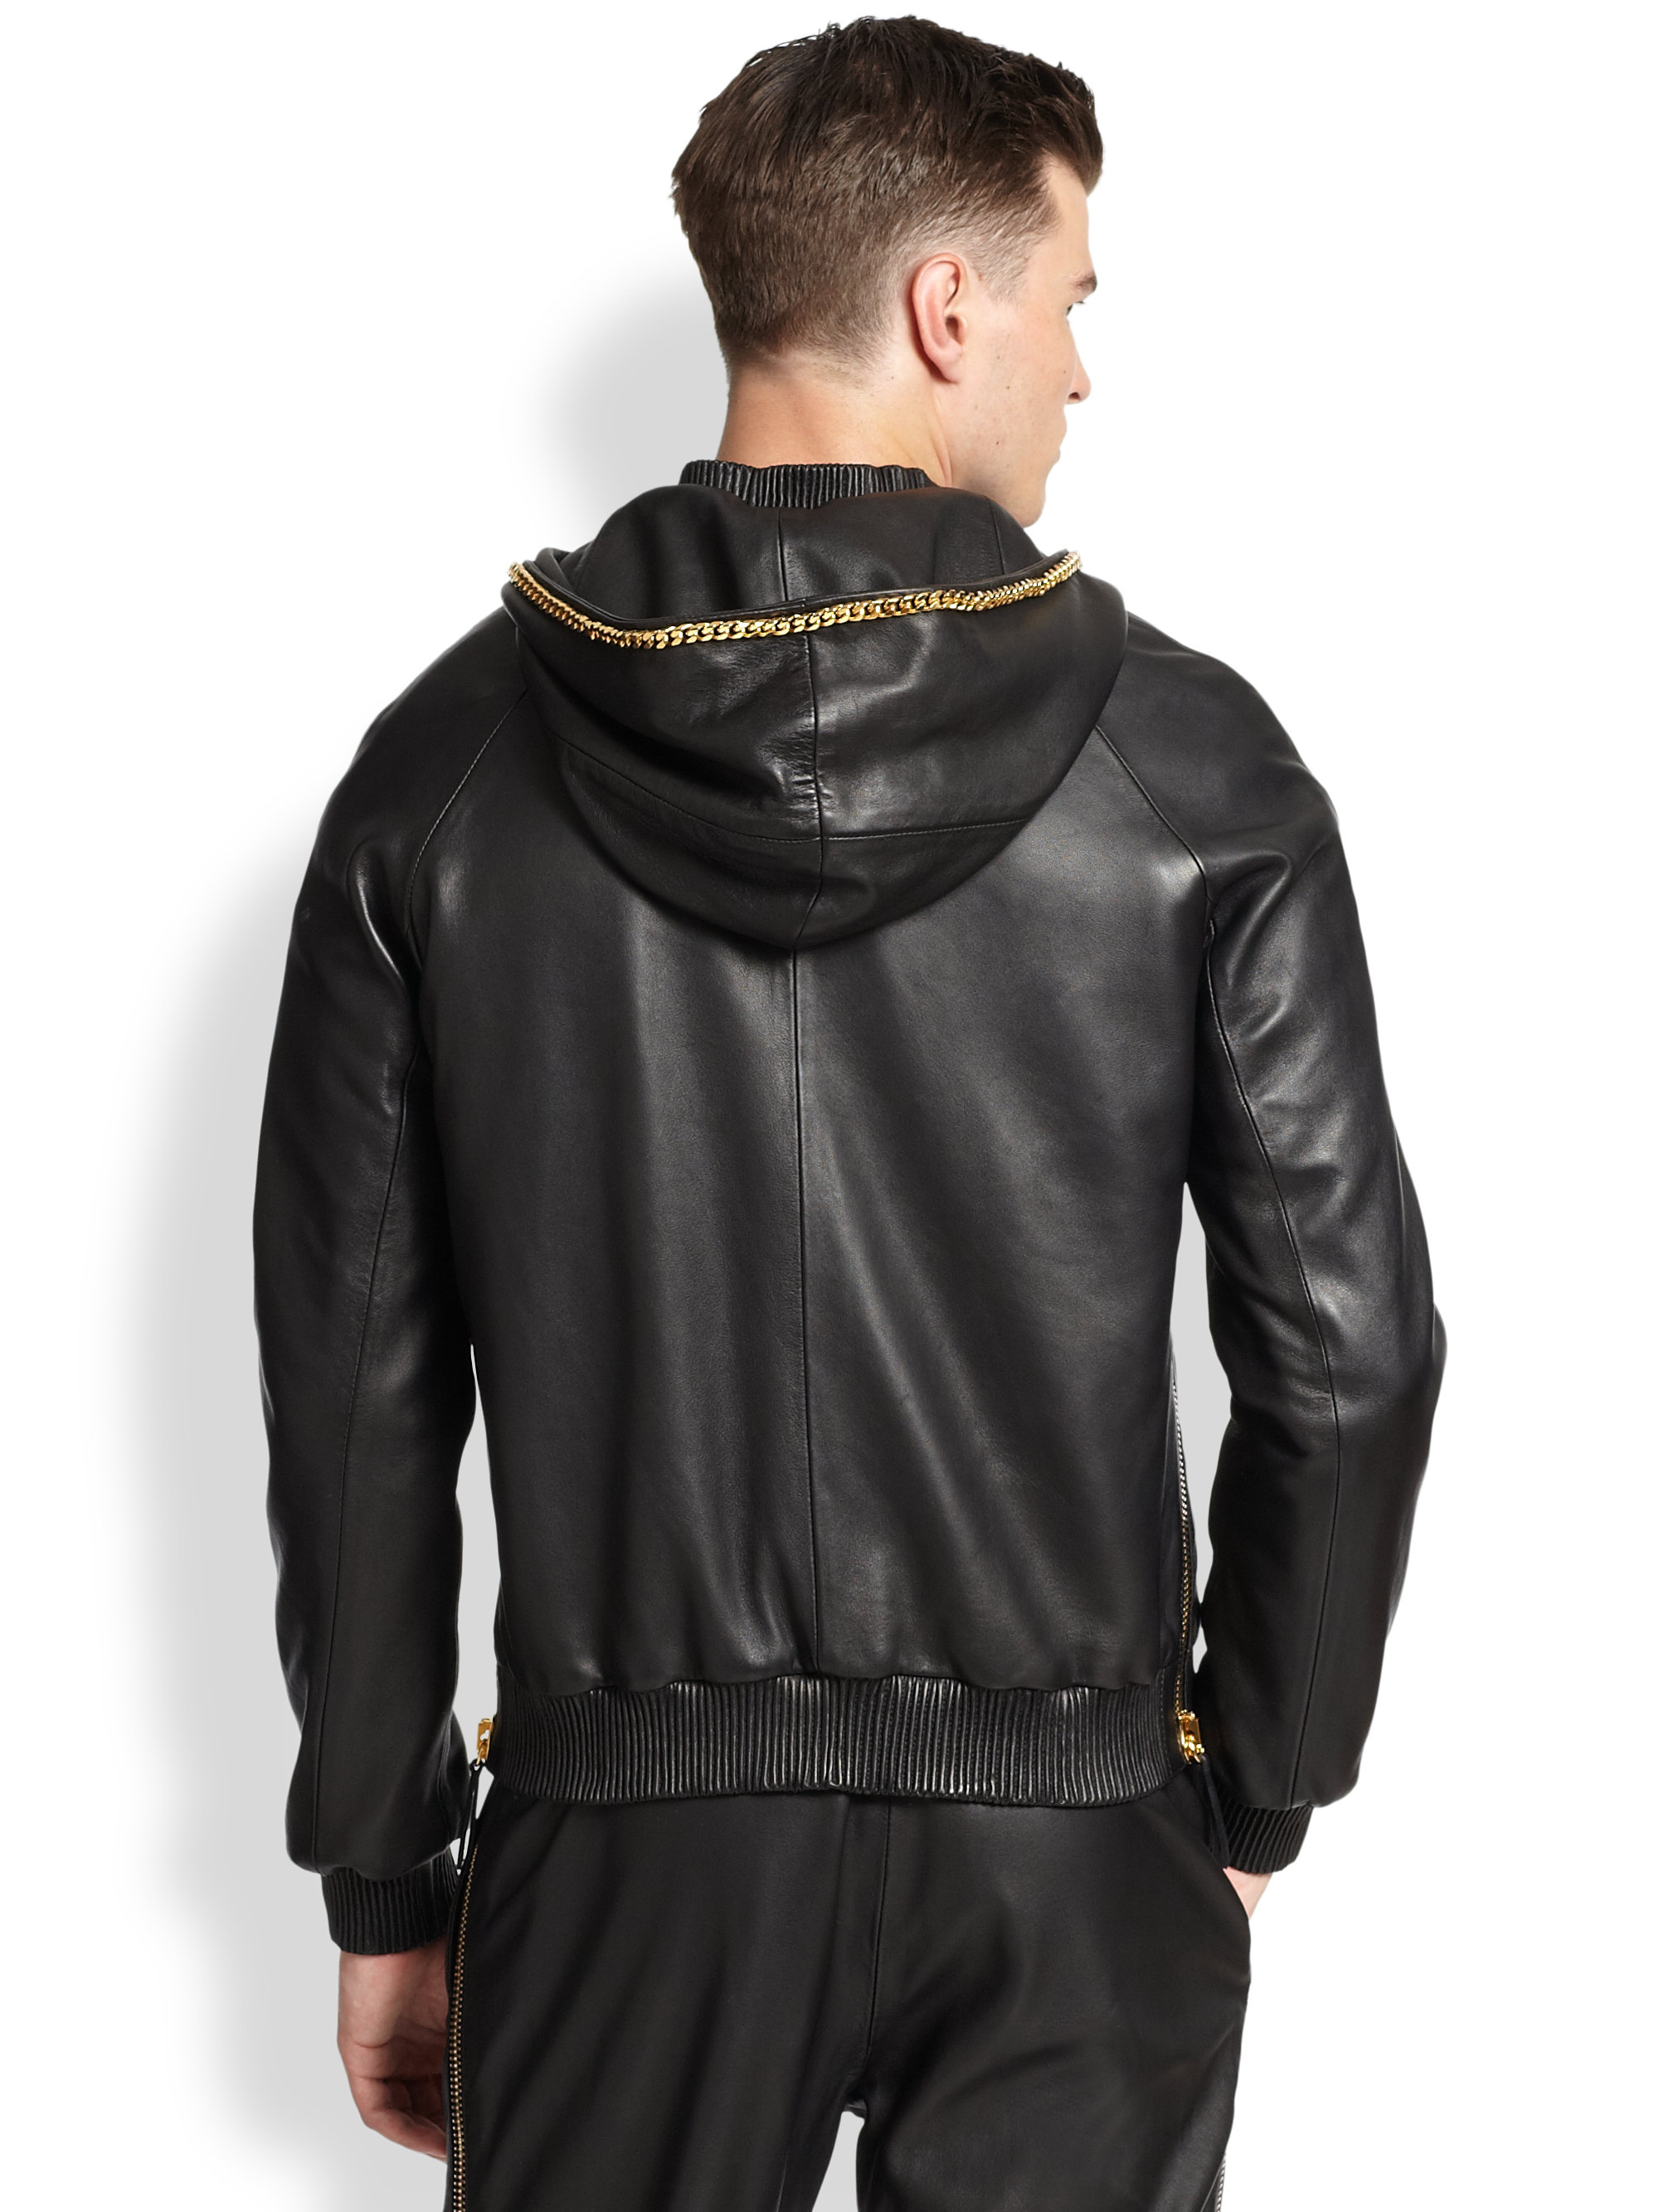 Giuseppe zanotti Leather Chain Link Hoodie in Black for Men | Lyst